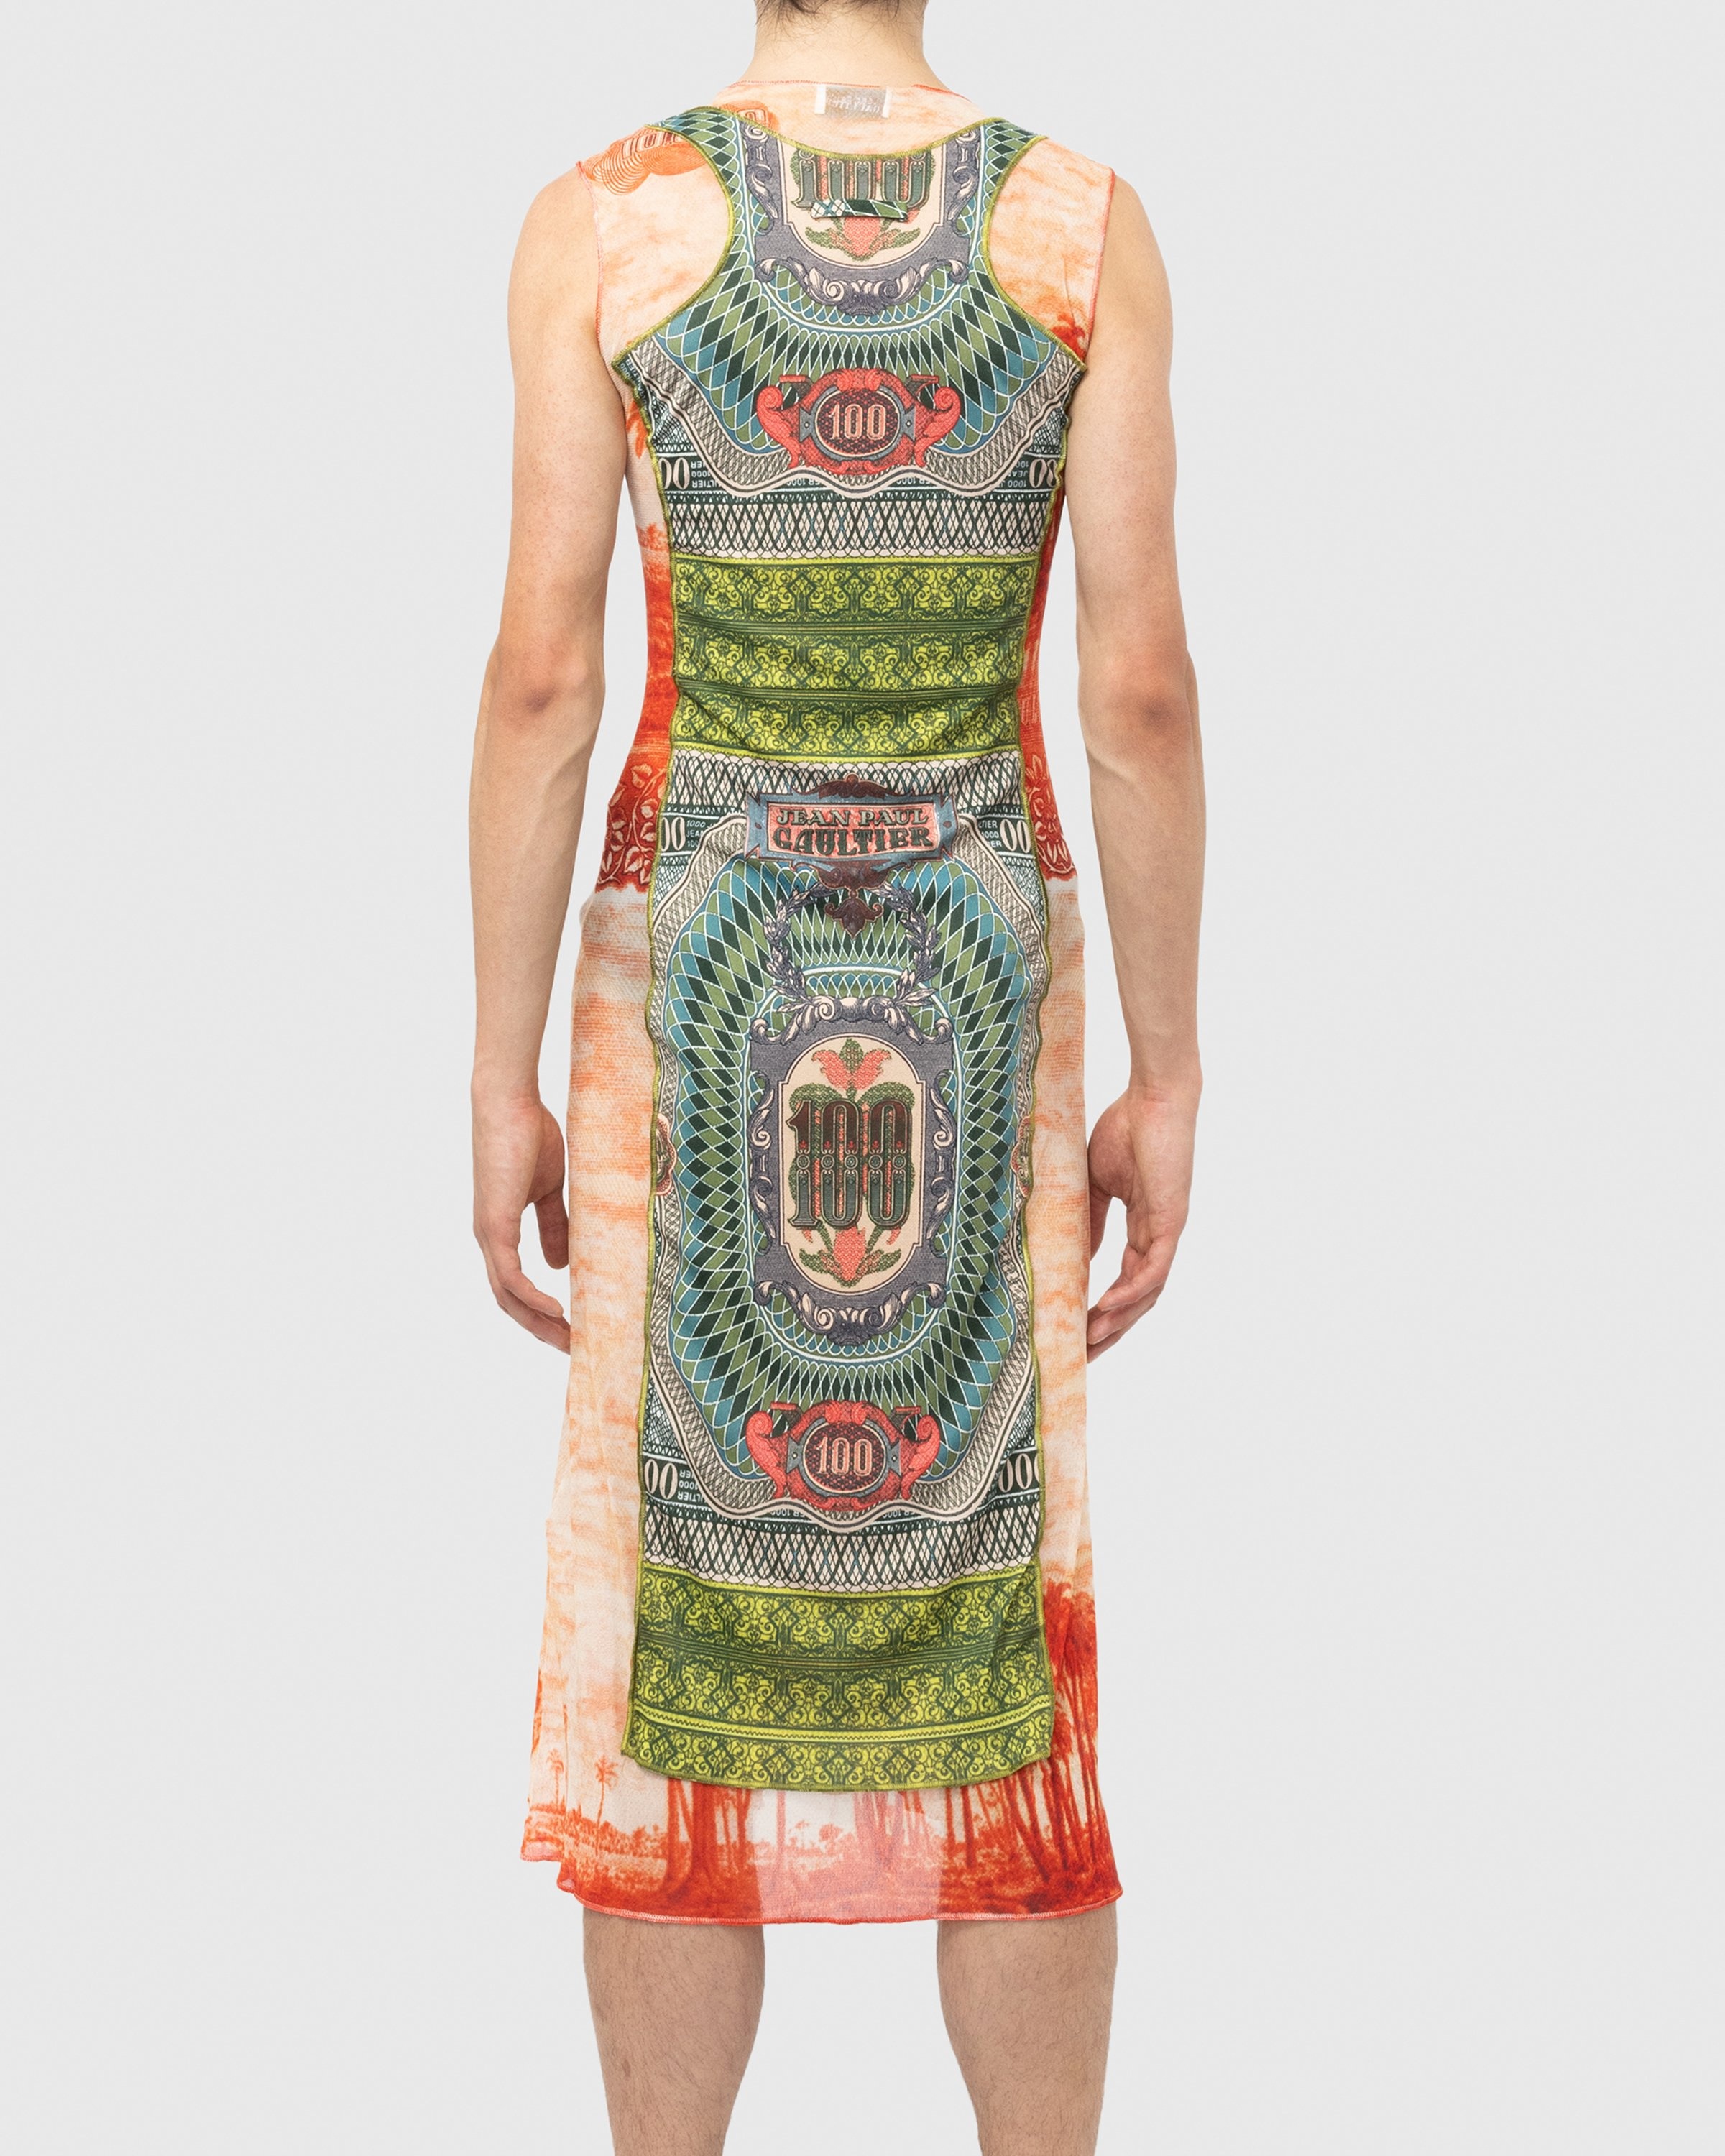 Jean Paul Gaultier – Banknote and Palm Tree Print Dress Multi - Maxi - Green - Image 4